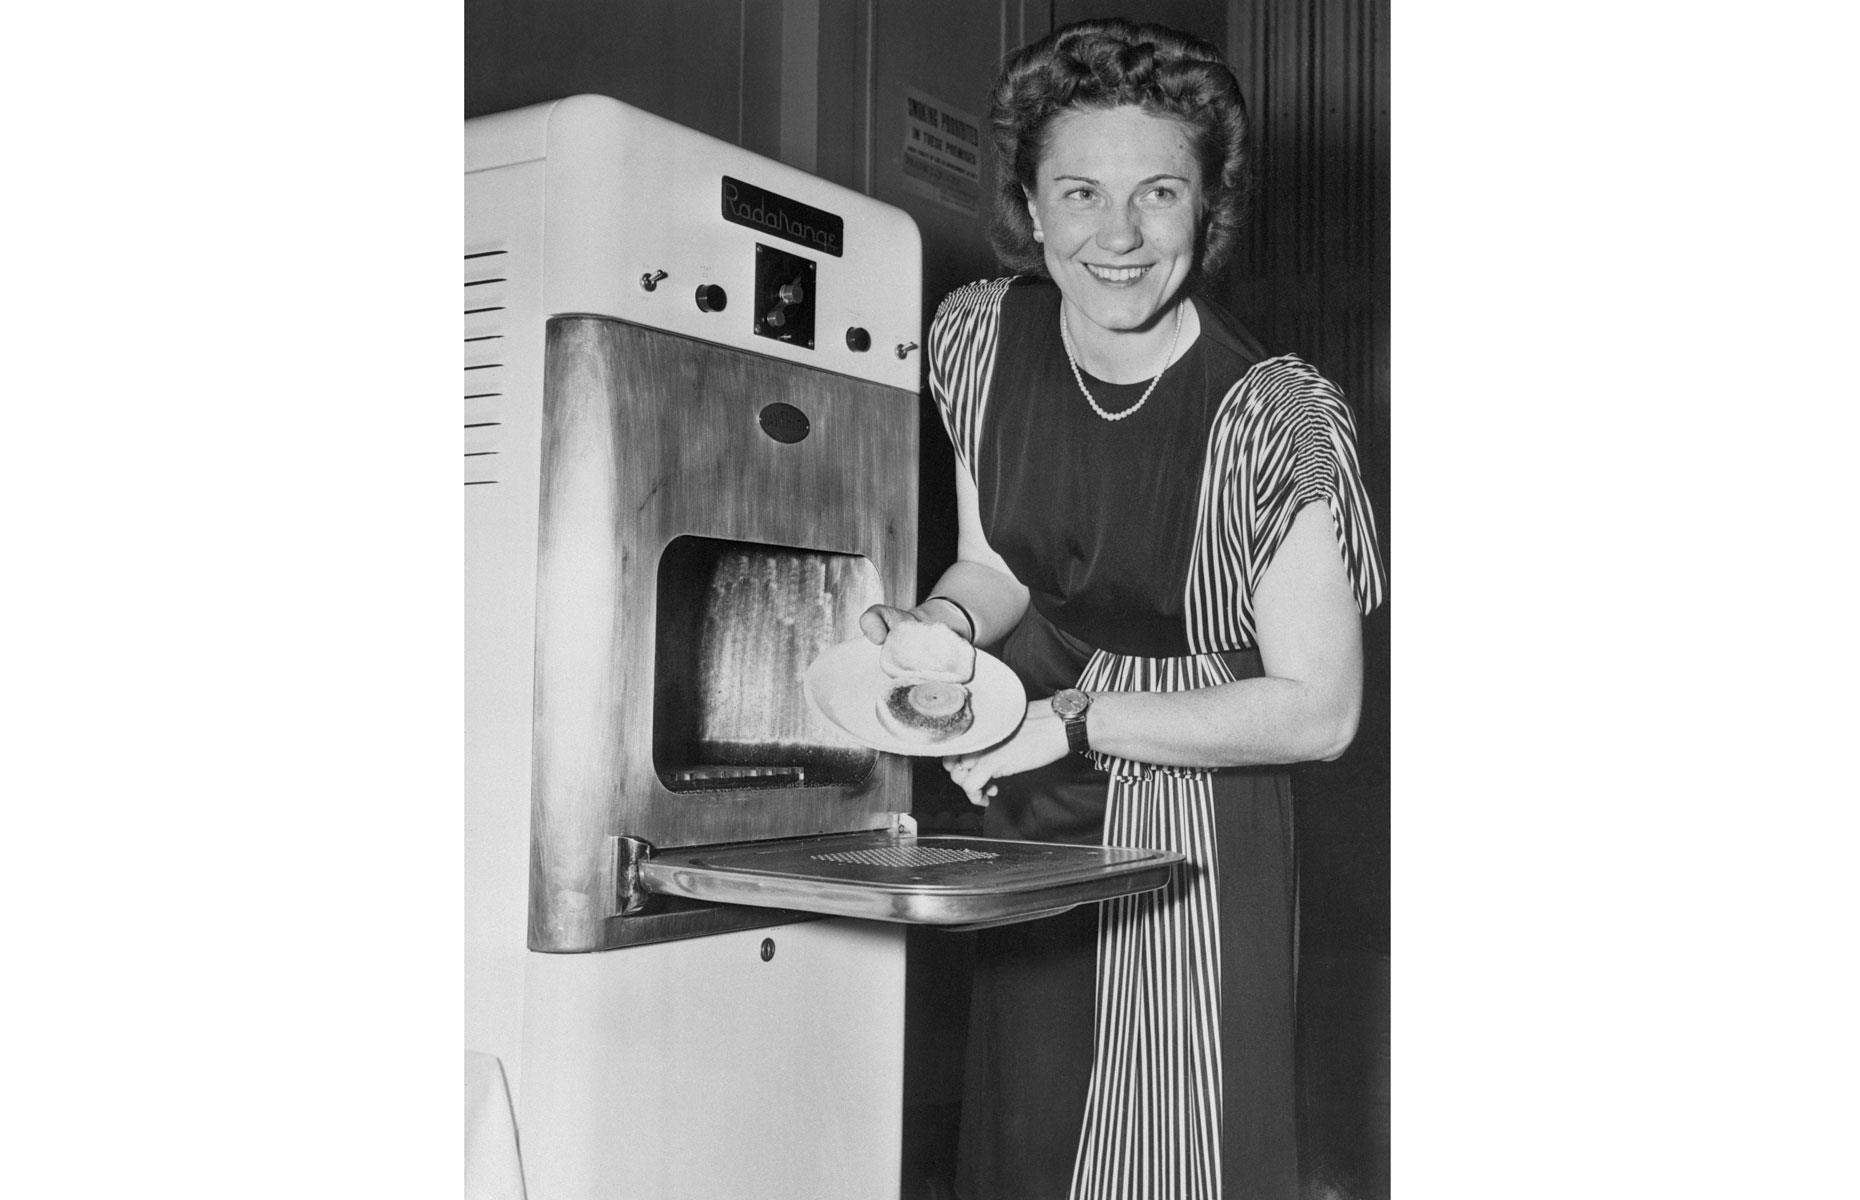 Second World War: microwave oven